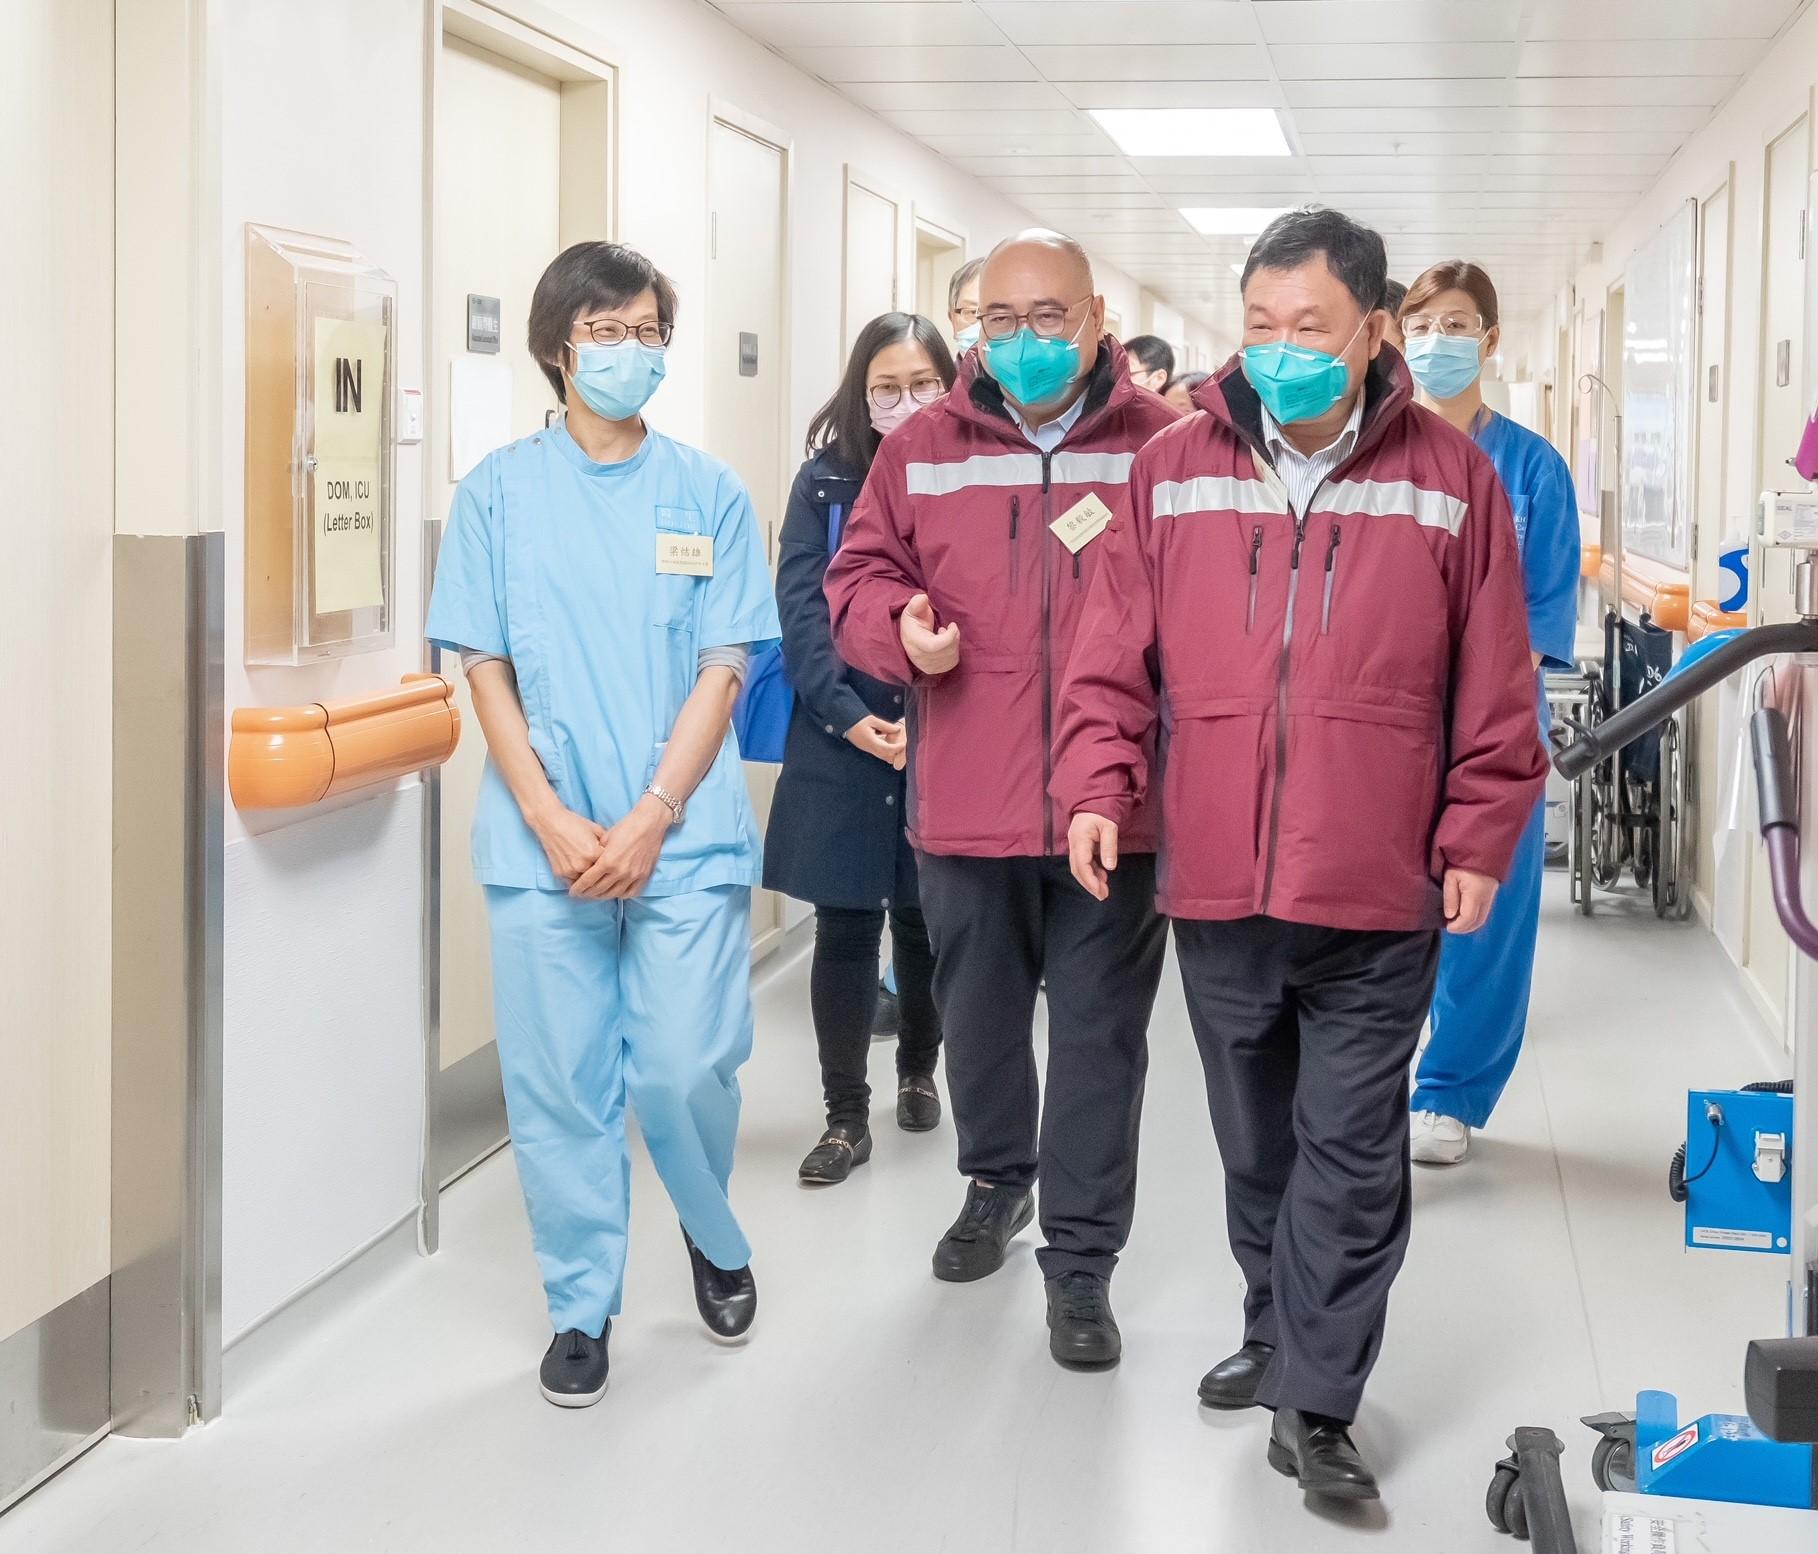 The Mainland COVID-19 medical expert delegation meets with the clinical team of the Queen Elizabeth Hospital to share clinical experience in treating critically ill patients with COVID-19 today (February 22). Photo shows the expert delegation inspecting the clinical departments.